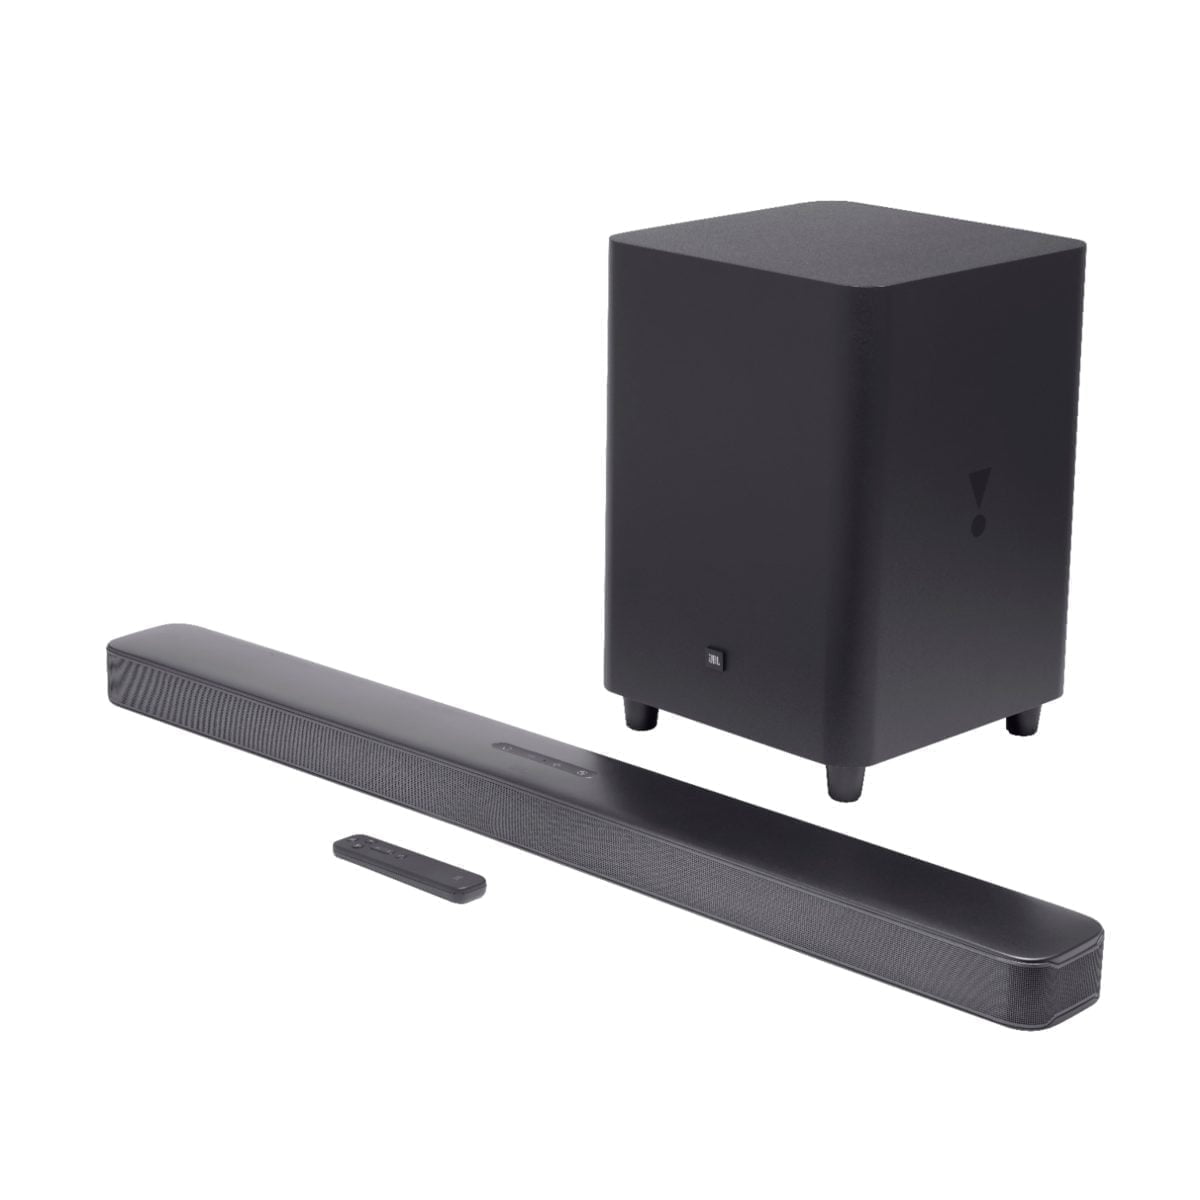 6395190Ld Scaled Jbl &Amp;Lt;H1&Amp;Gt;Jbl - 5.1-Channel Soundbar With Wireless Subwoofer - Black&Amp;Lt;/H1&Amp;Gt; Https://Www.youtube.com/Watch?V=386_Dt_1Ajy Get Better Audio Quality From Your Tv With This Jbl Bar 5.1 Surround Soundbar. Multibeam Technology Delivers Powerful Sound Without The Need For Extra Speakers, While Wi-Fi Connectivity Provides Access To Chromecast And Airplay 2 For Streaming Content. This Bluetooth-Enabled Jbl Bar 5.1 Surround Soundbar Features A Wireless Subwoofer That Adds Punchy Bass To Movie Soundtracks And Action-Packed Scenes. Jbl Jbl - 5.1-Channel Soundbar With Wireless Subwoofer - Black